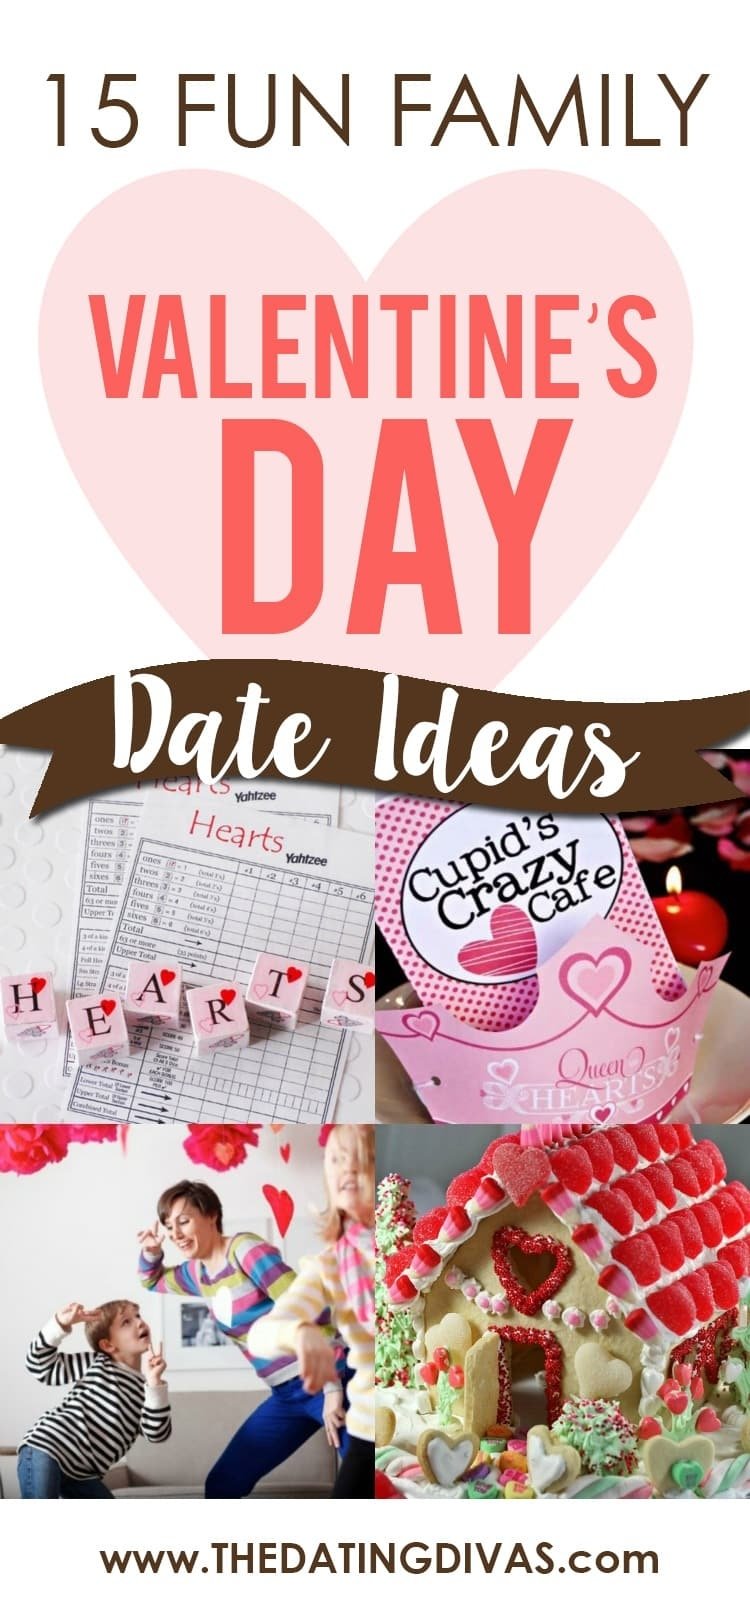 10 Gorgeous Fun Date Ideas Valentines Day the top 76 valentines day date ideas from the dating divas 8 2022